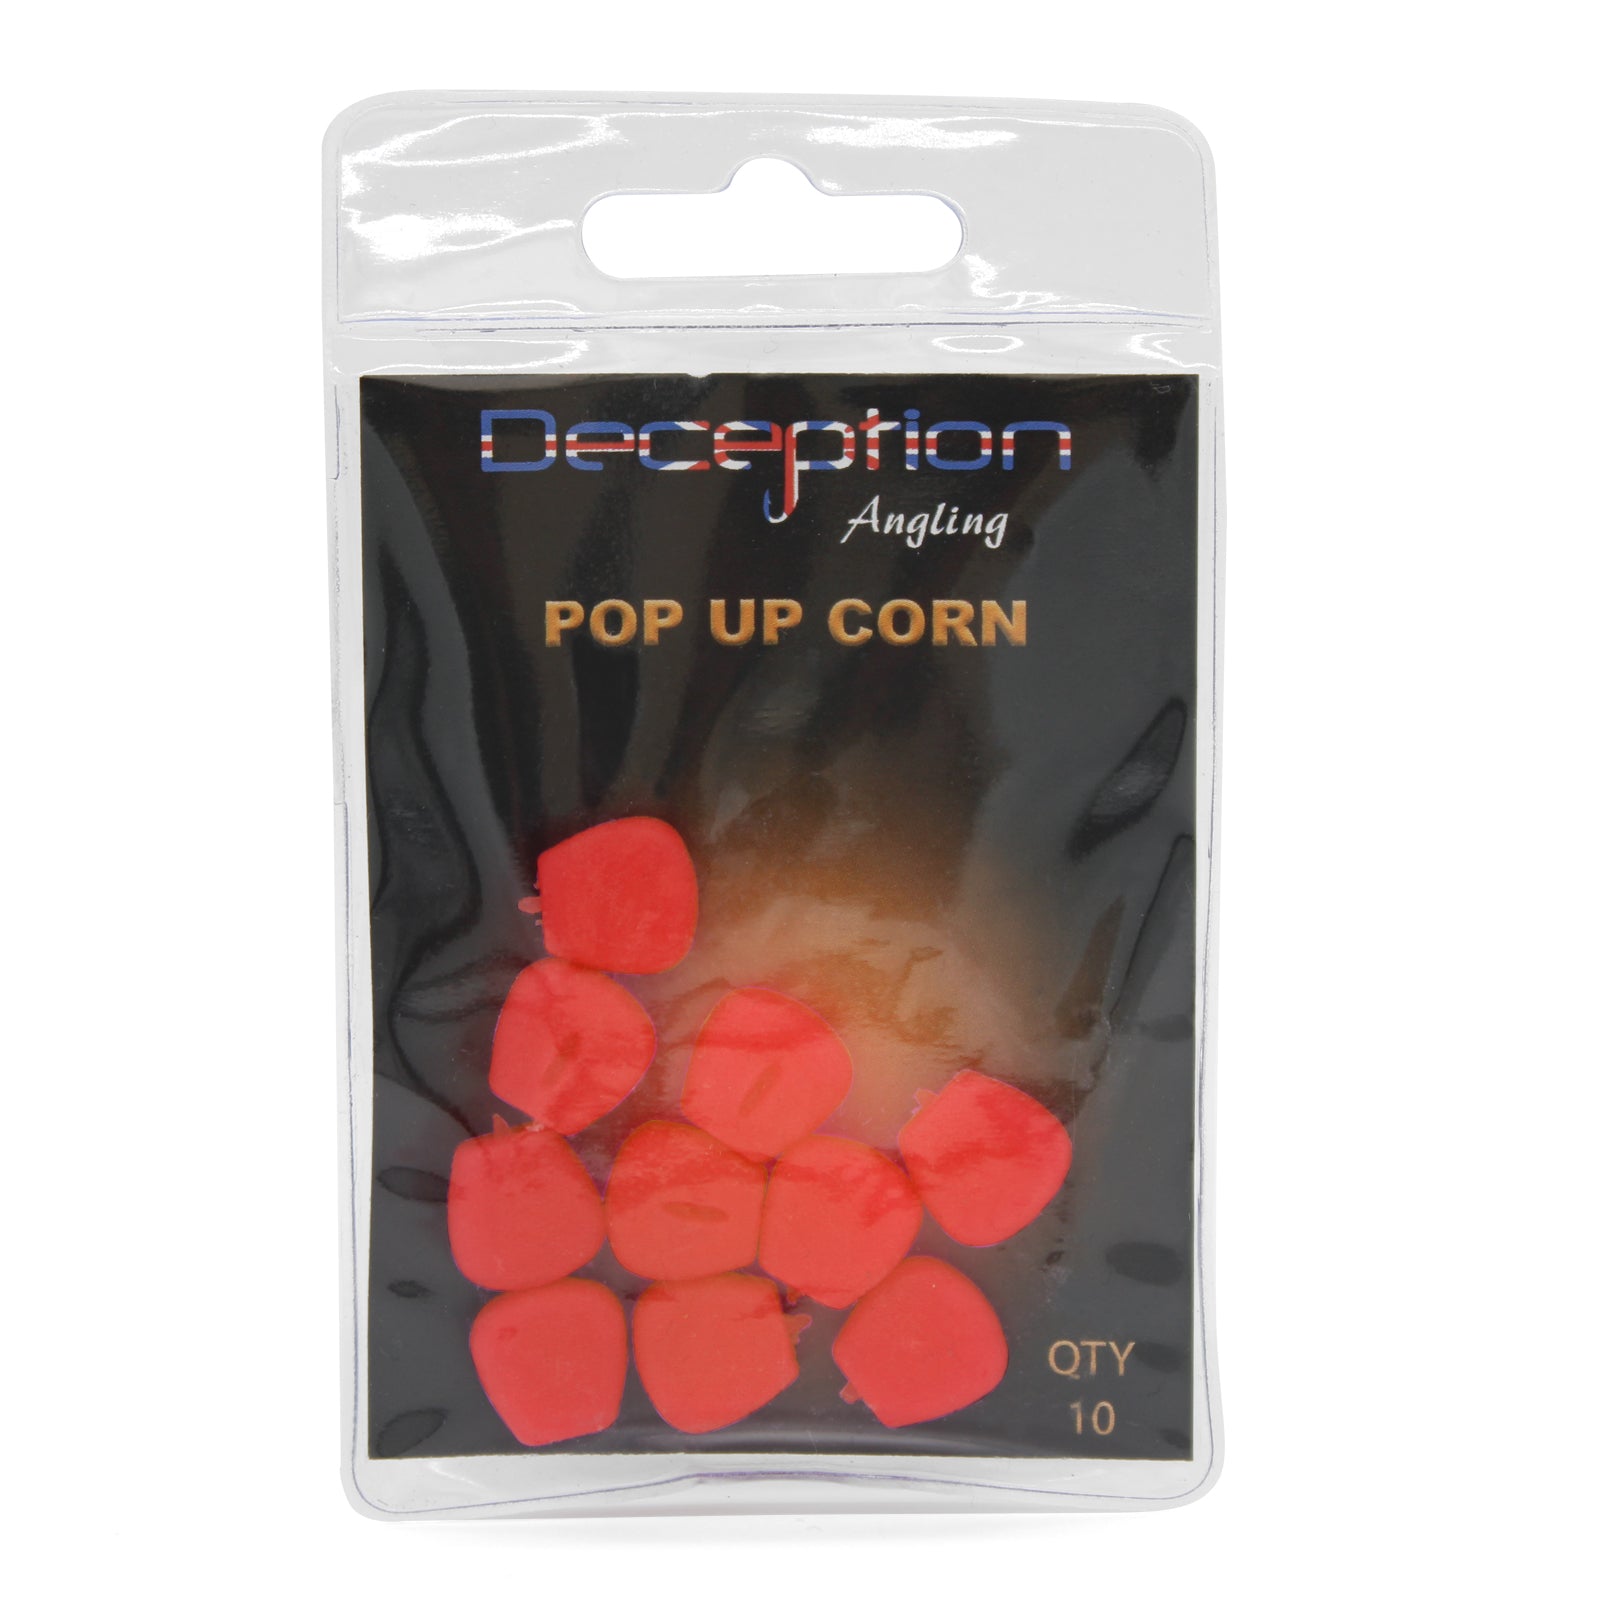 Deception Angling Pop Up Corn for Fishing in Red